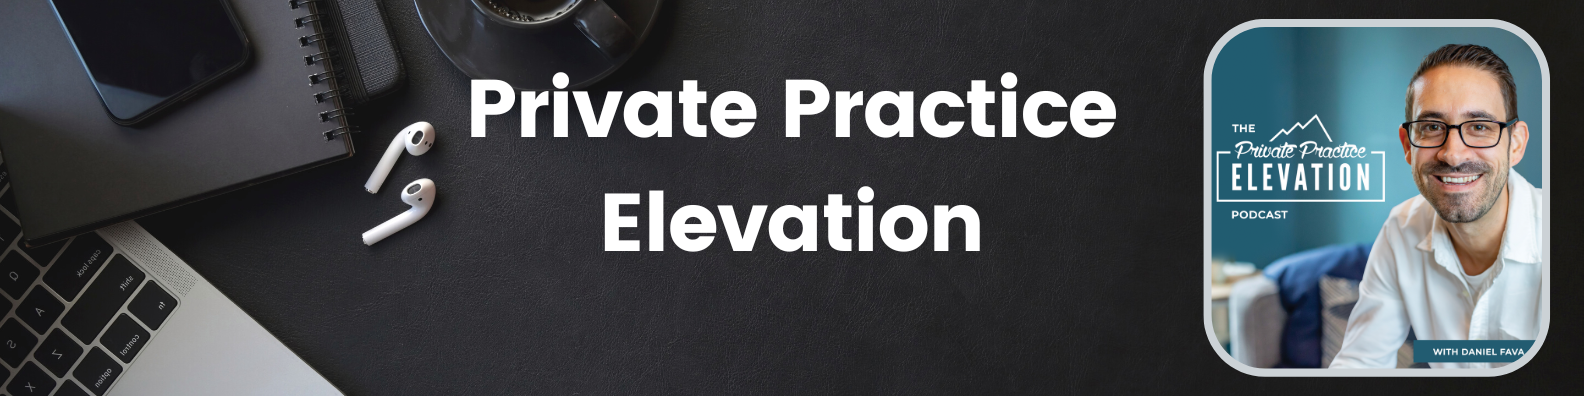 Private Practice Elevation Podcast